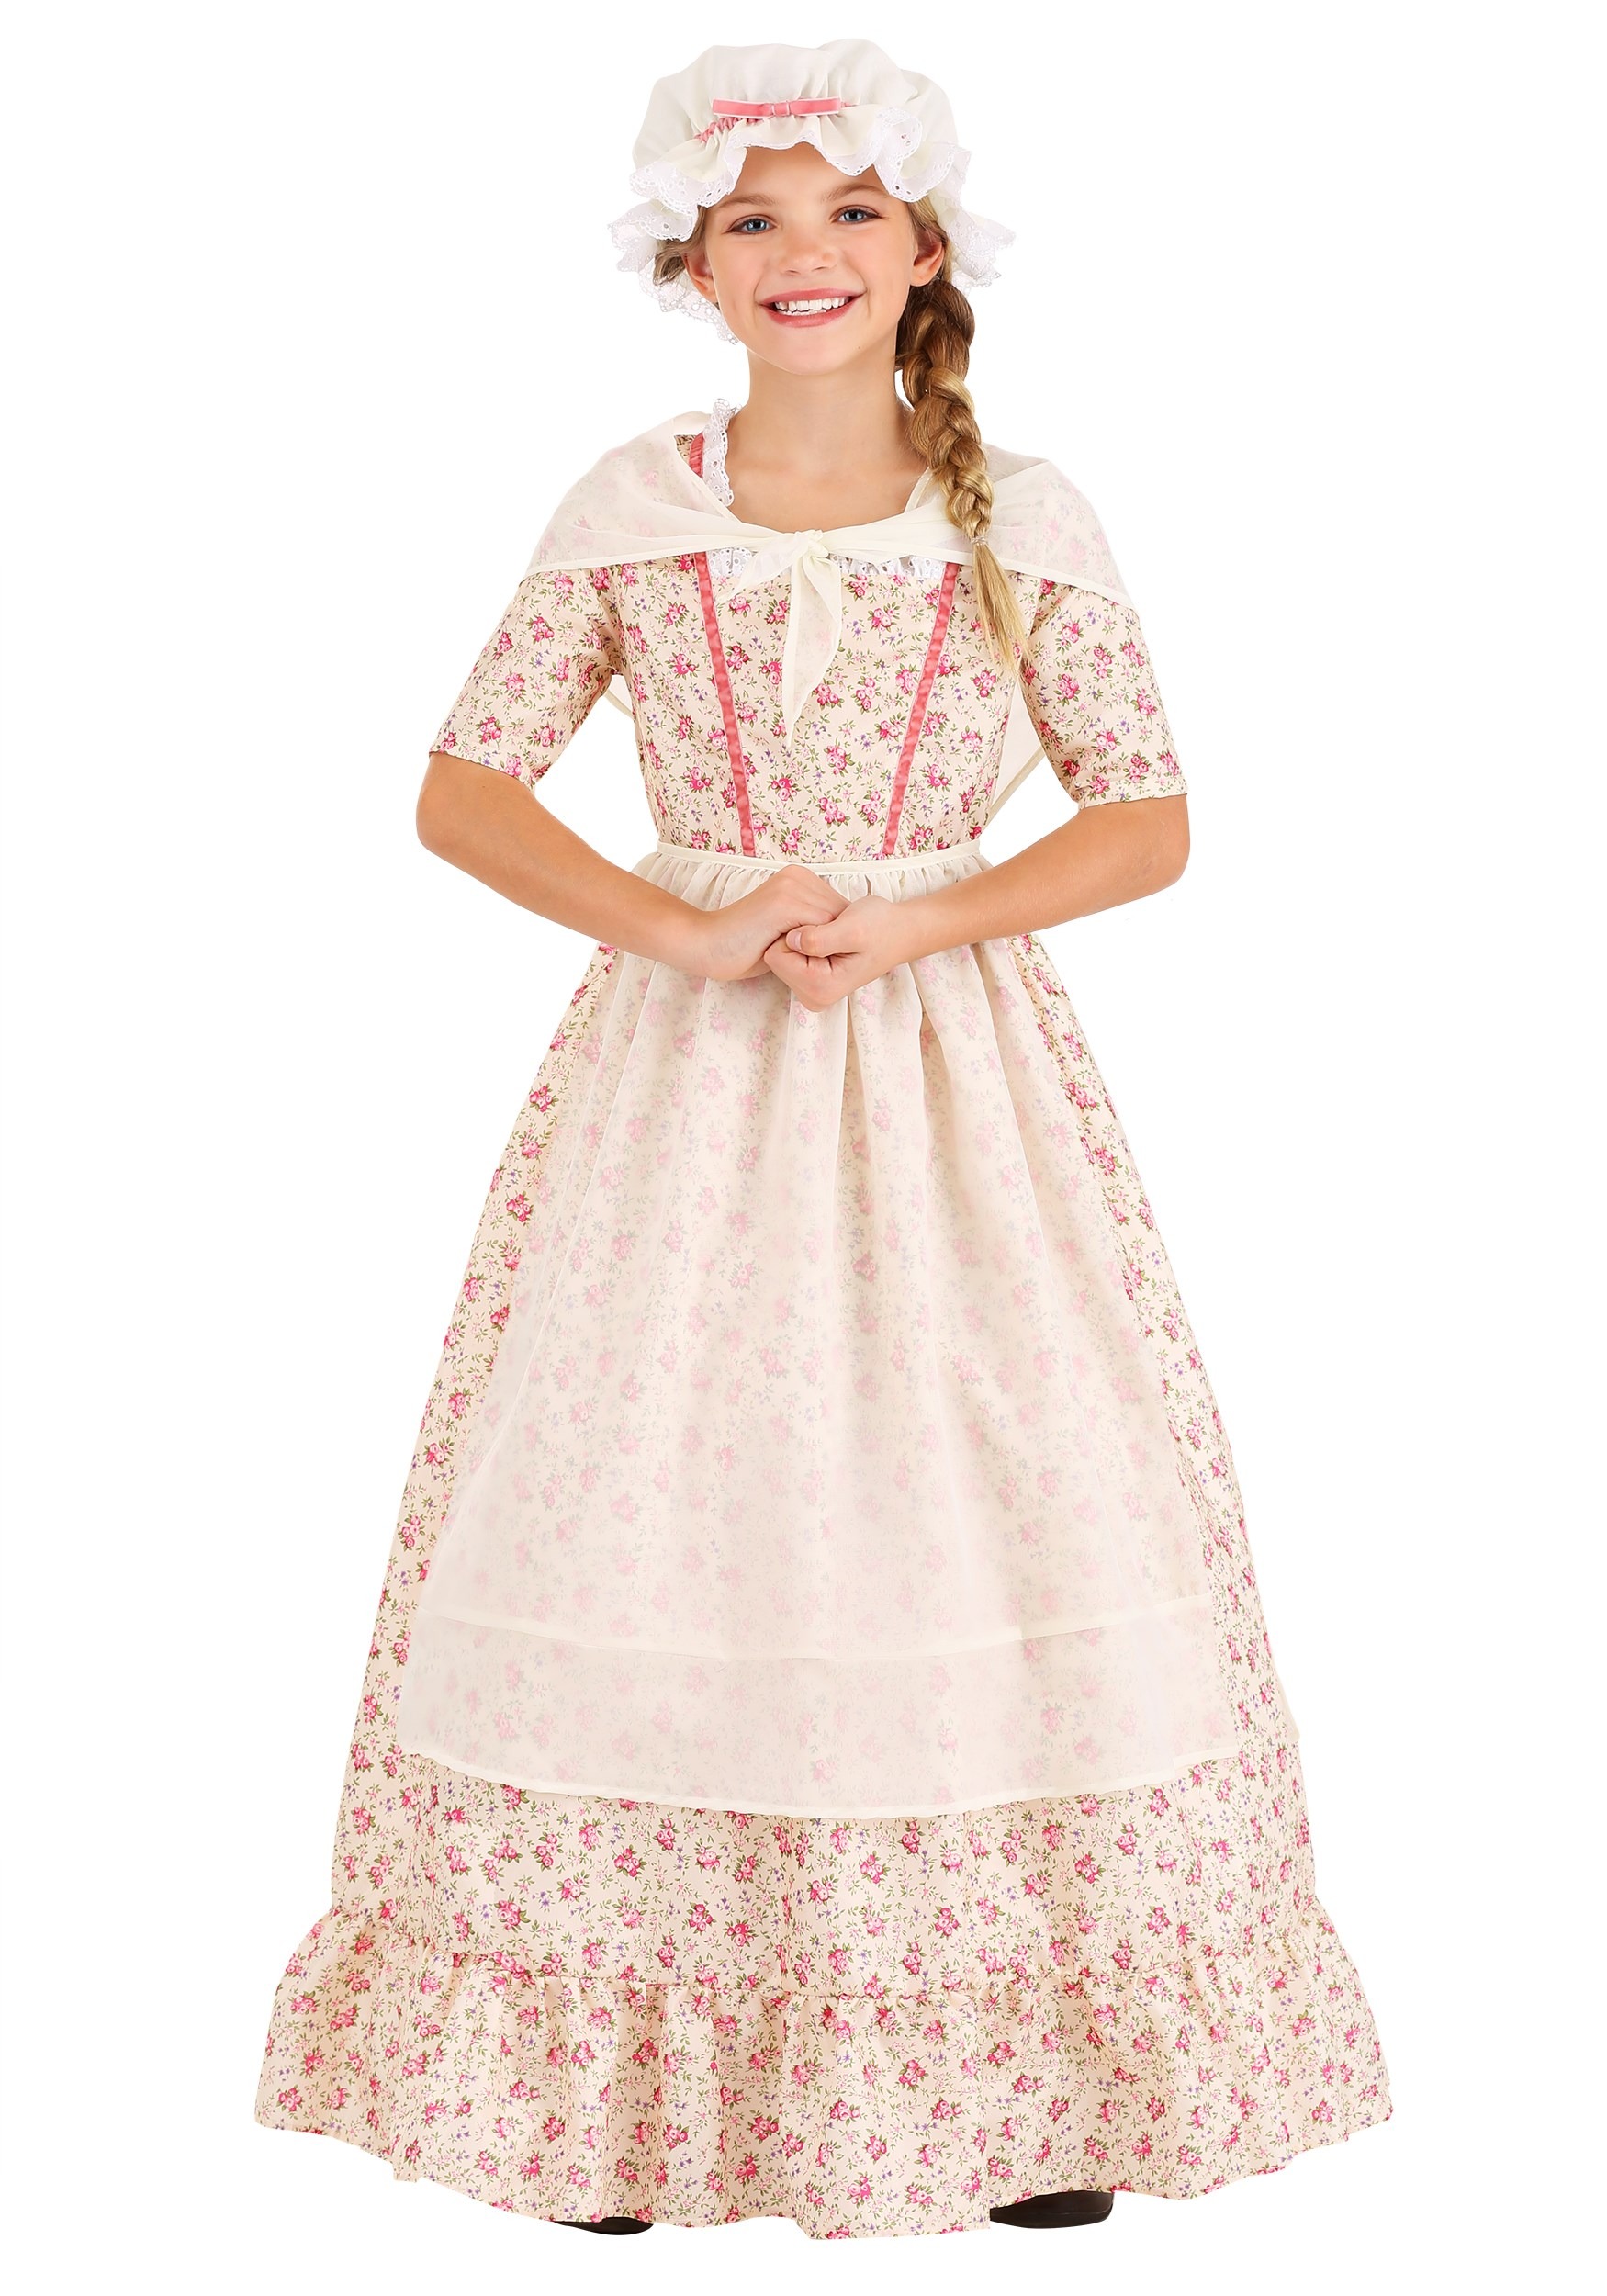 Colonial Girl's Costume